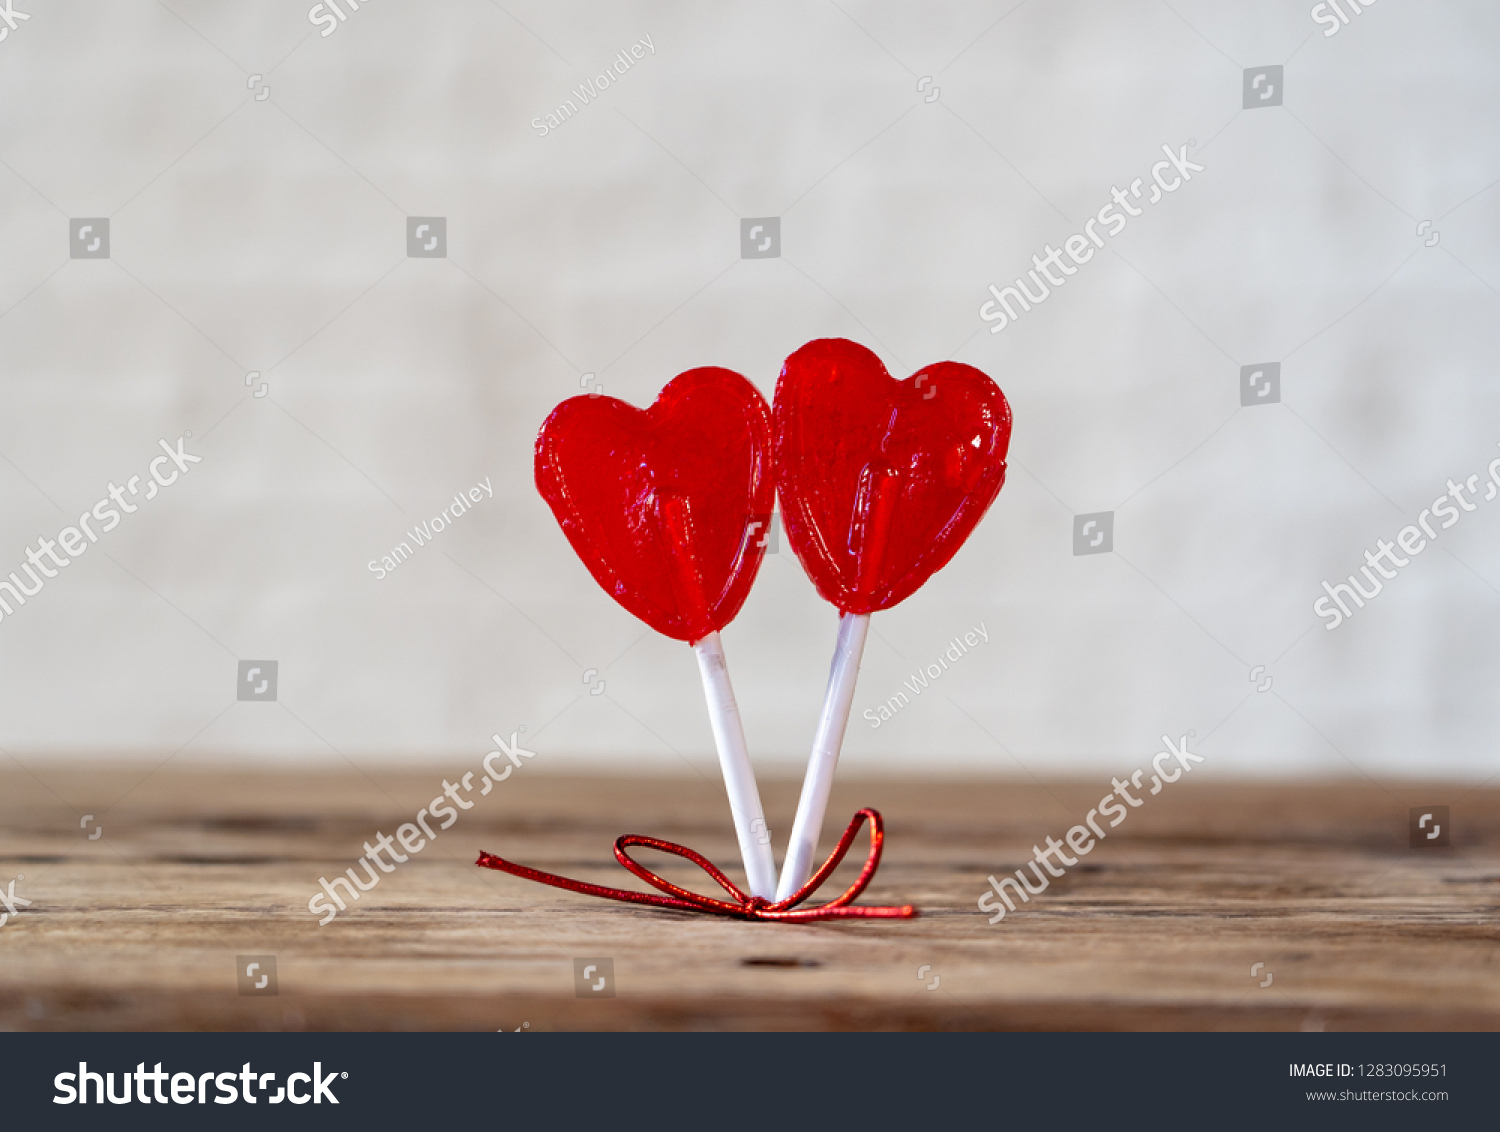 Two cute red heart shaped lollipops on rustic wooden table and beautiful romantic mood light and blur background as metaphor of love, togetherness and Valentines day greetings car design concept. #1283095951